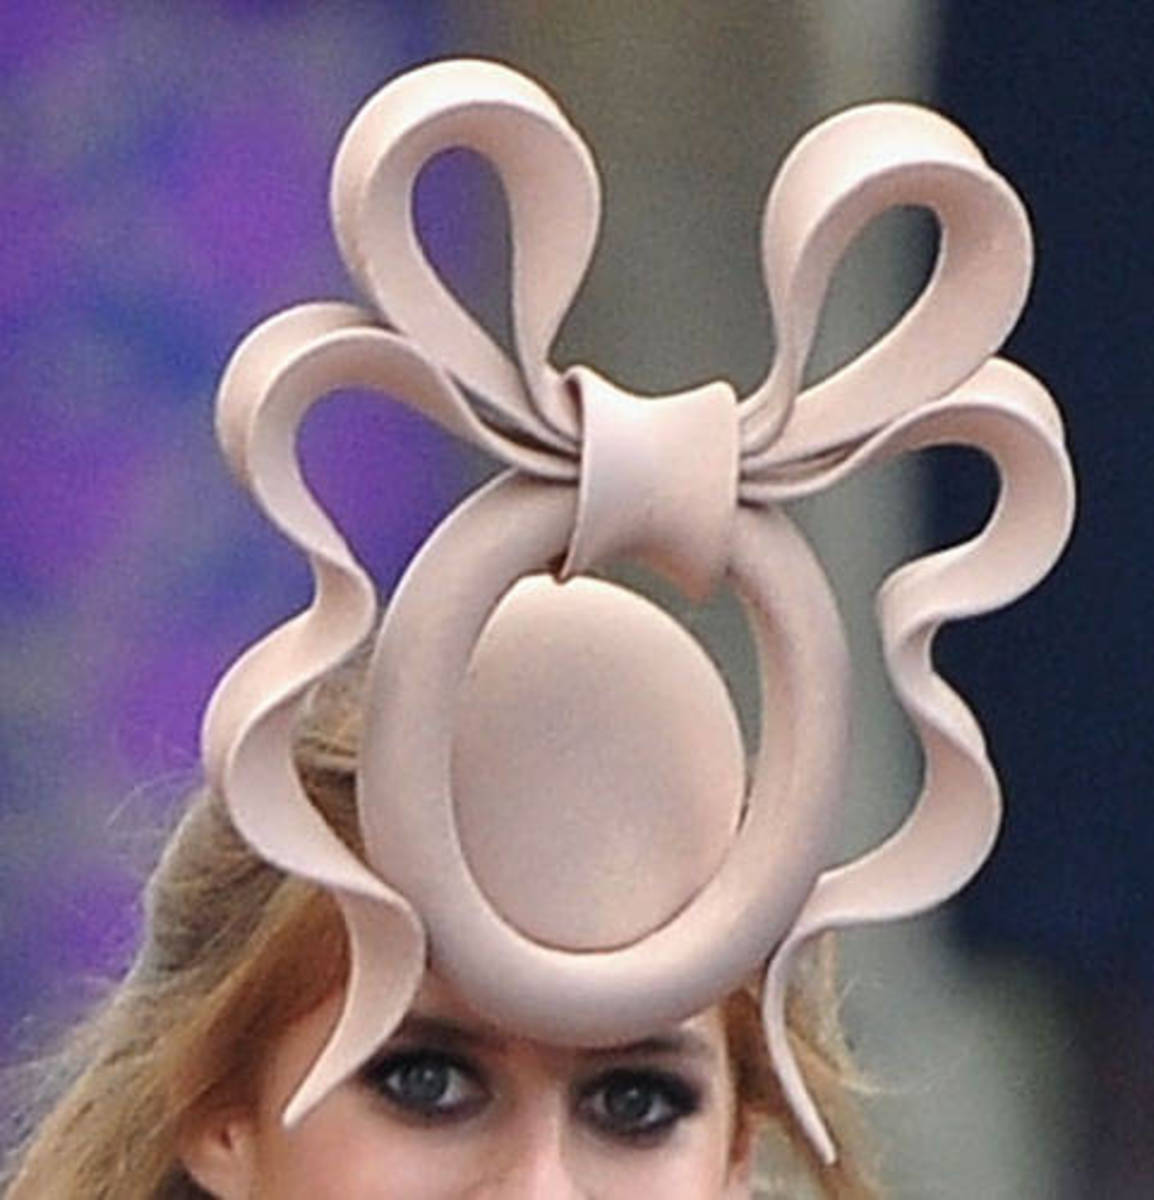 The now notorious Philip treacy hat worn by Princess Beatrice to the wedding of Wiliam and Kate